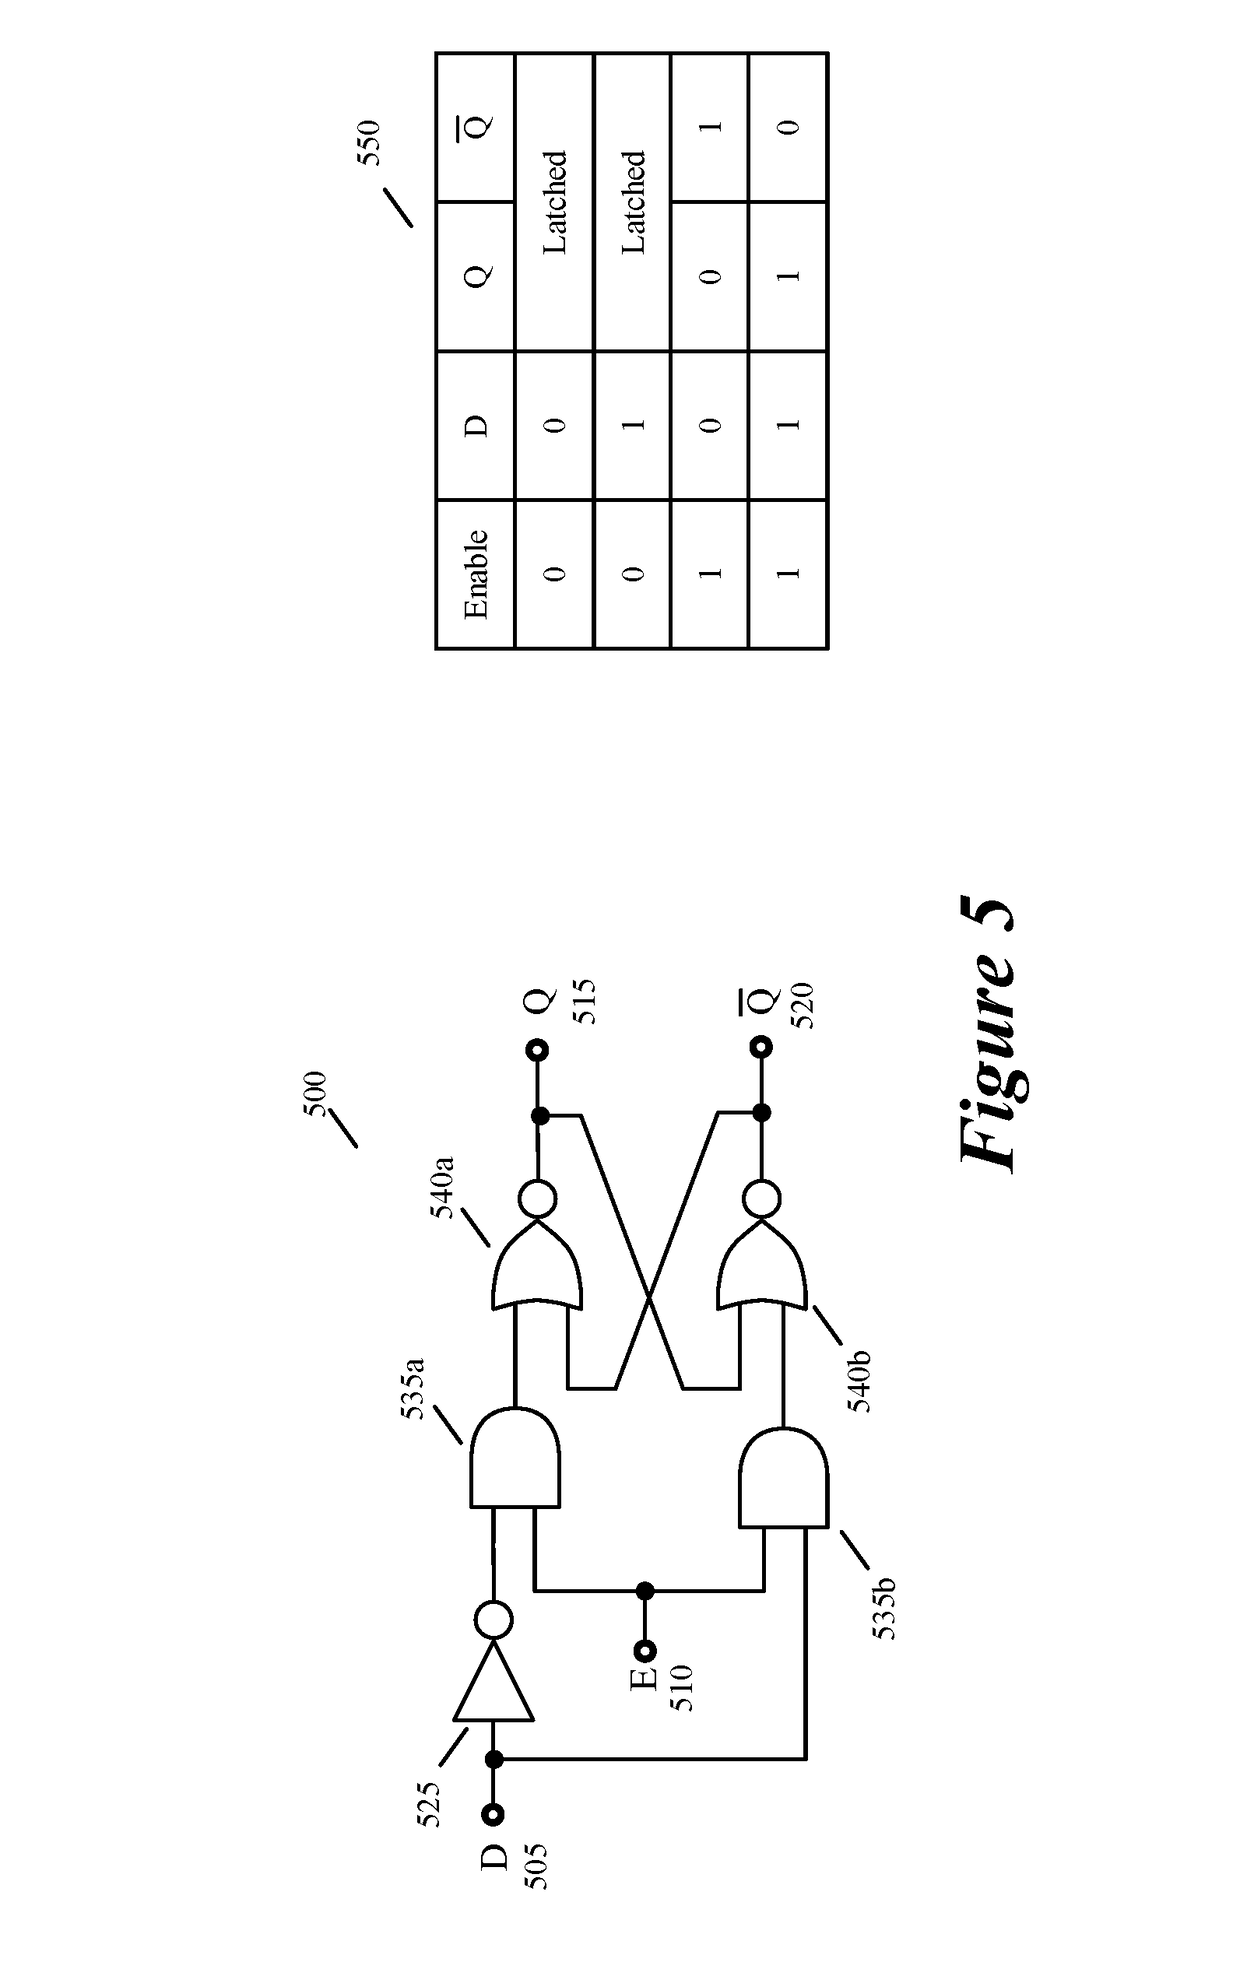 Three dimensional circuit implementing machine trained network